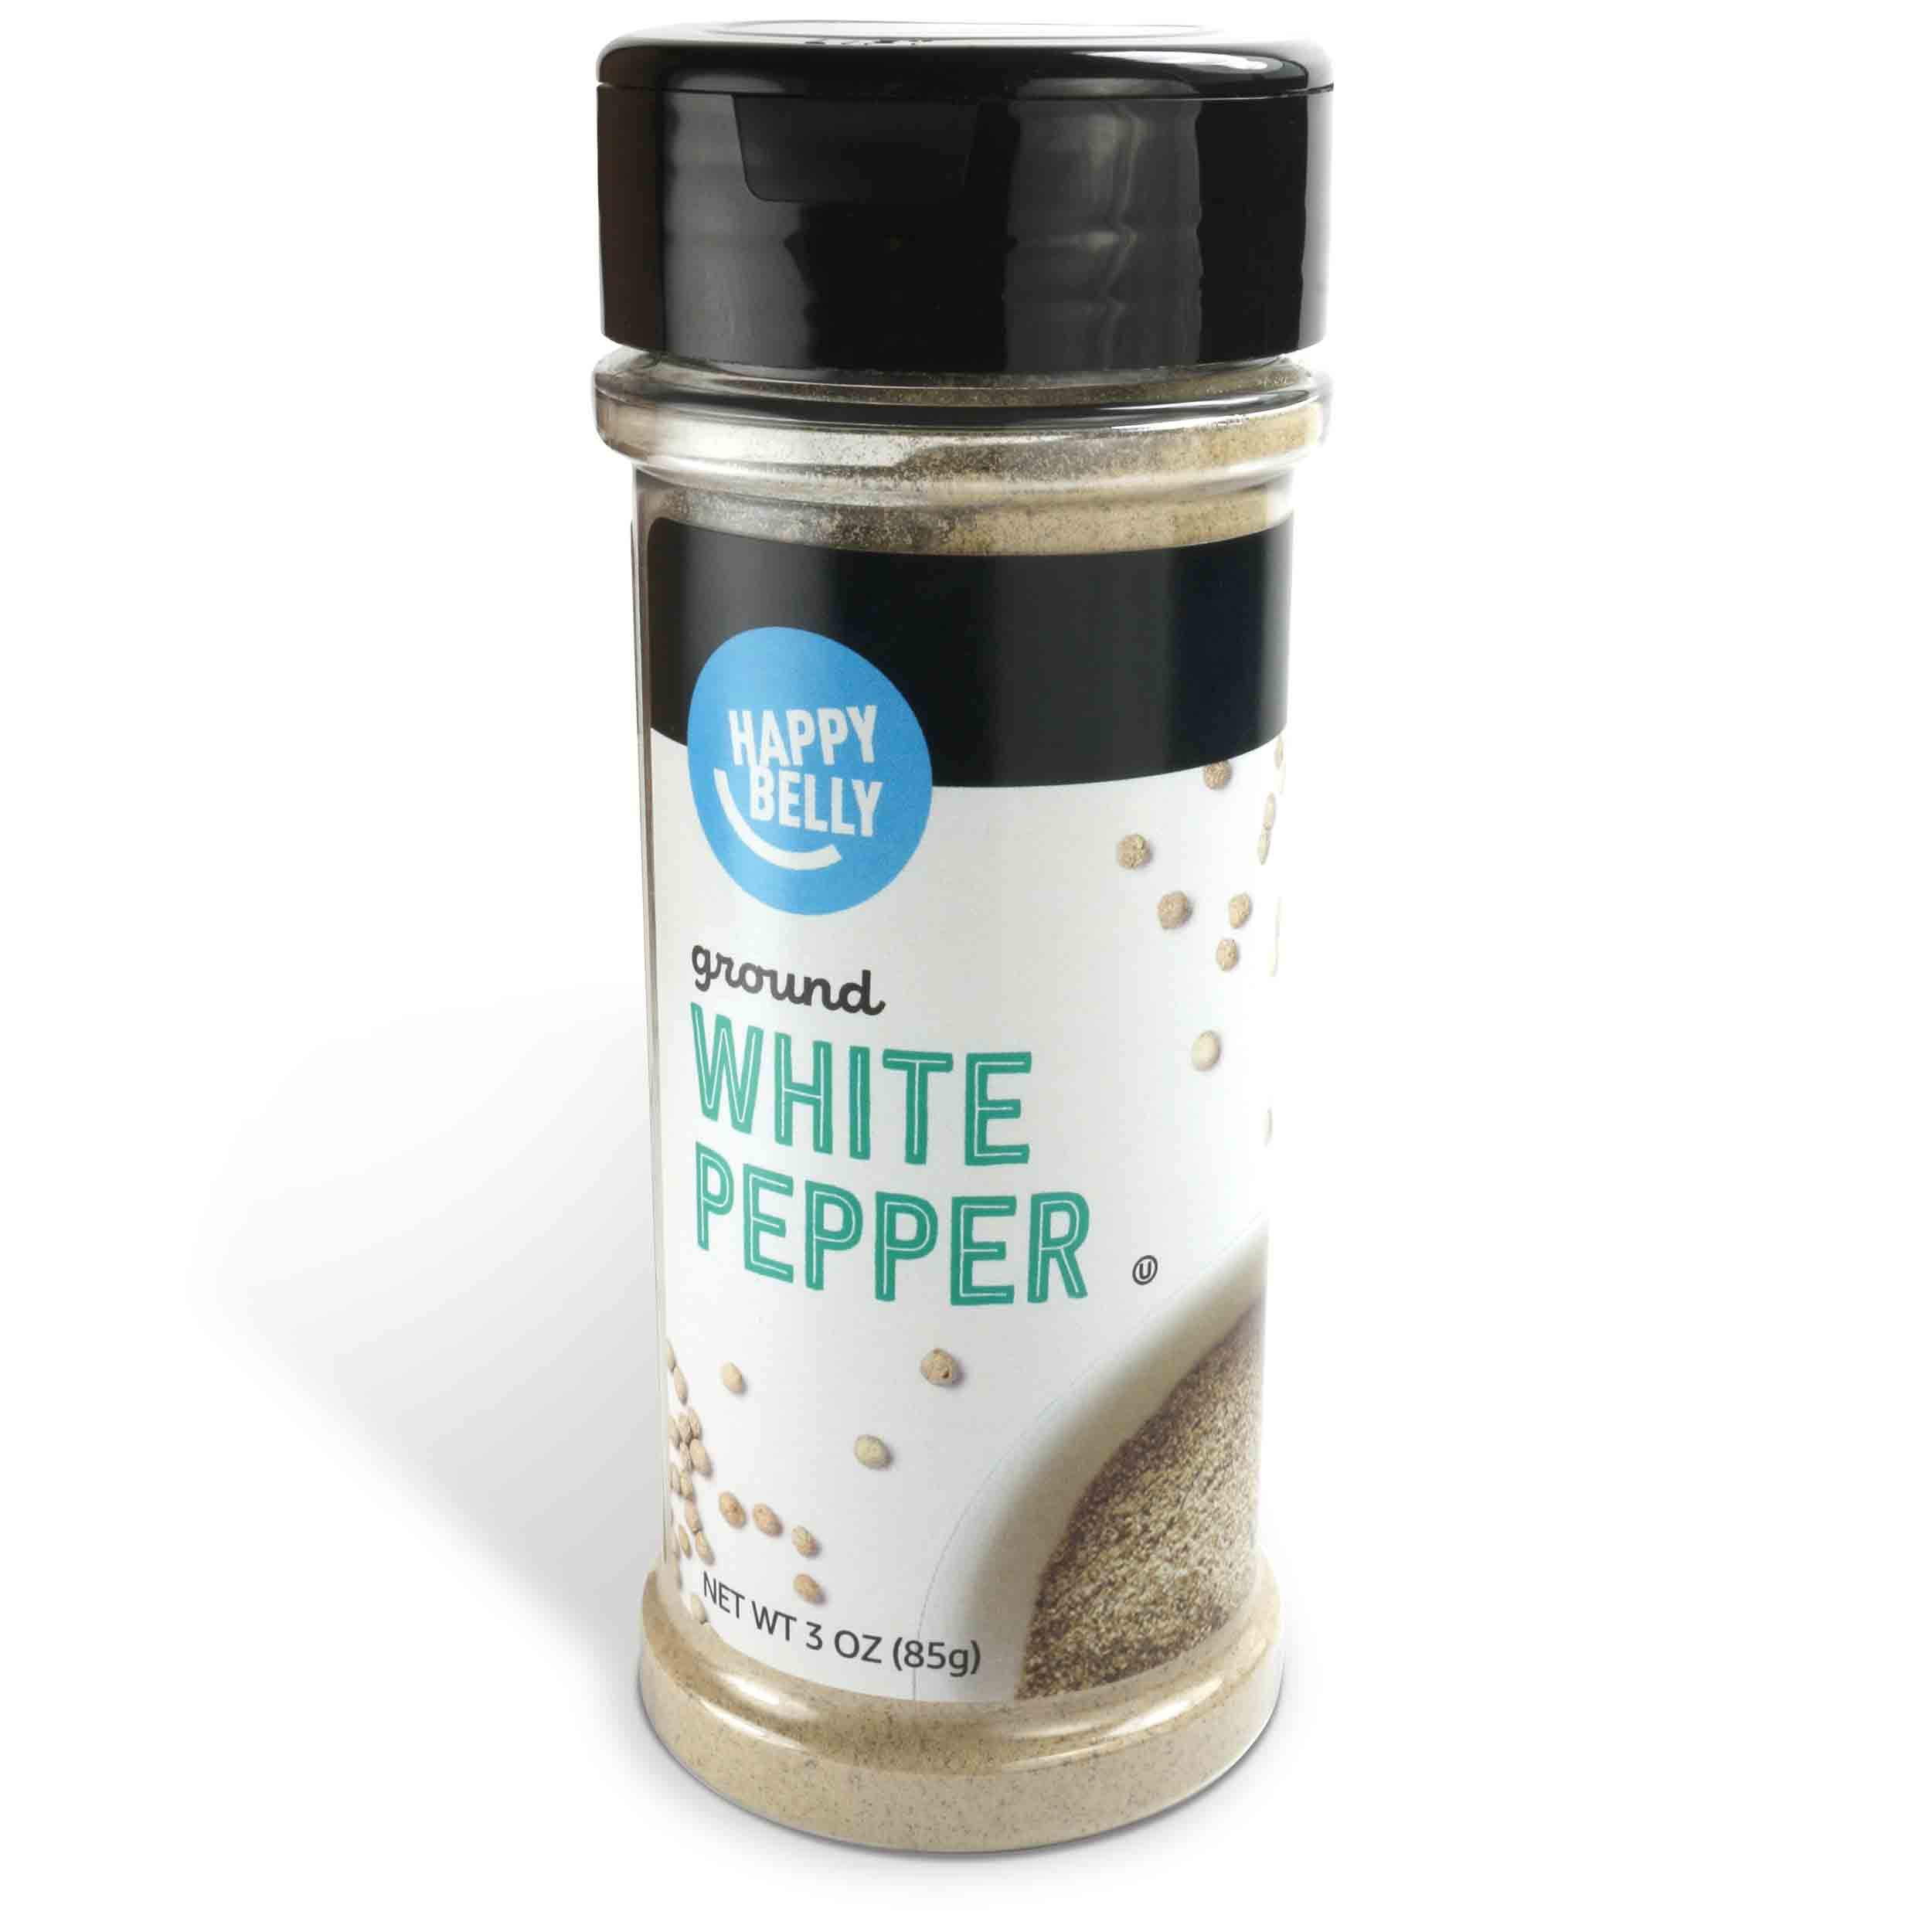 3-Oz Happy Belly Ground White Pepper $1.88 + Free Shipping w/ Prime or on orders over $35